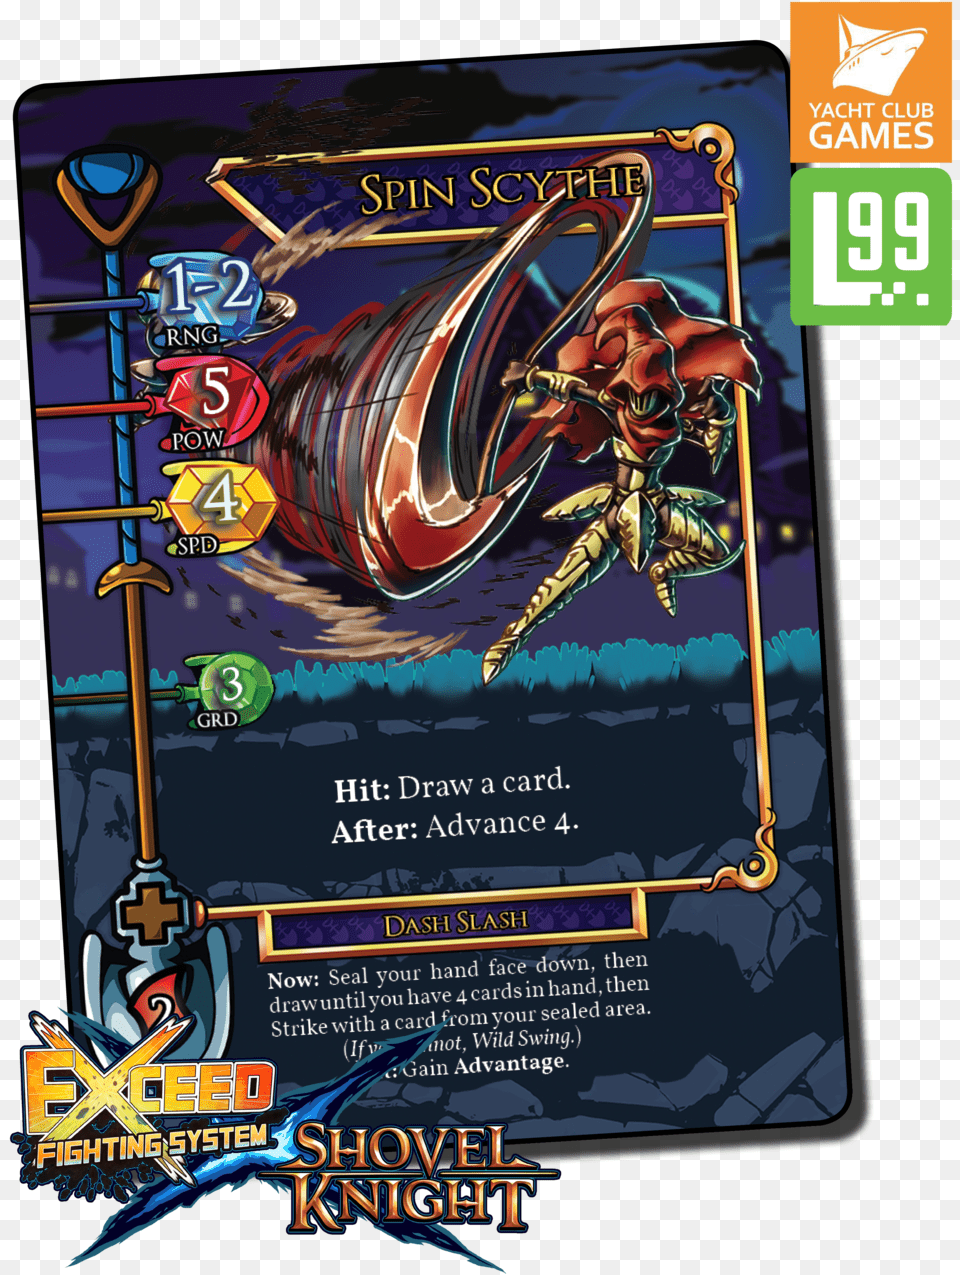 Exceed Card Previews Exceed Fighting System Shovel Knight, Advertisement, Poster, Book, Publication Png Image